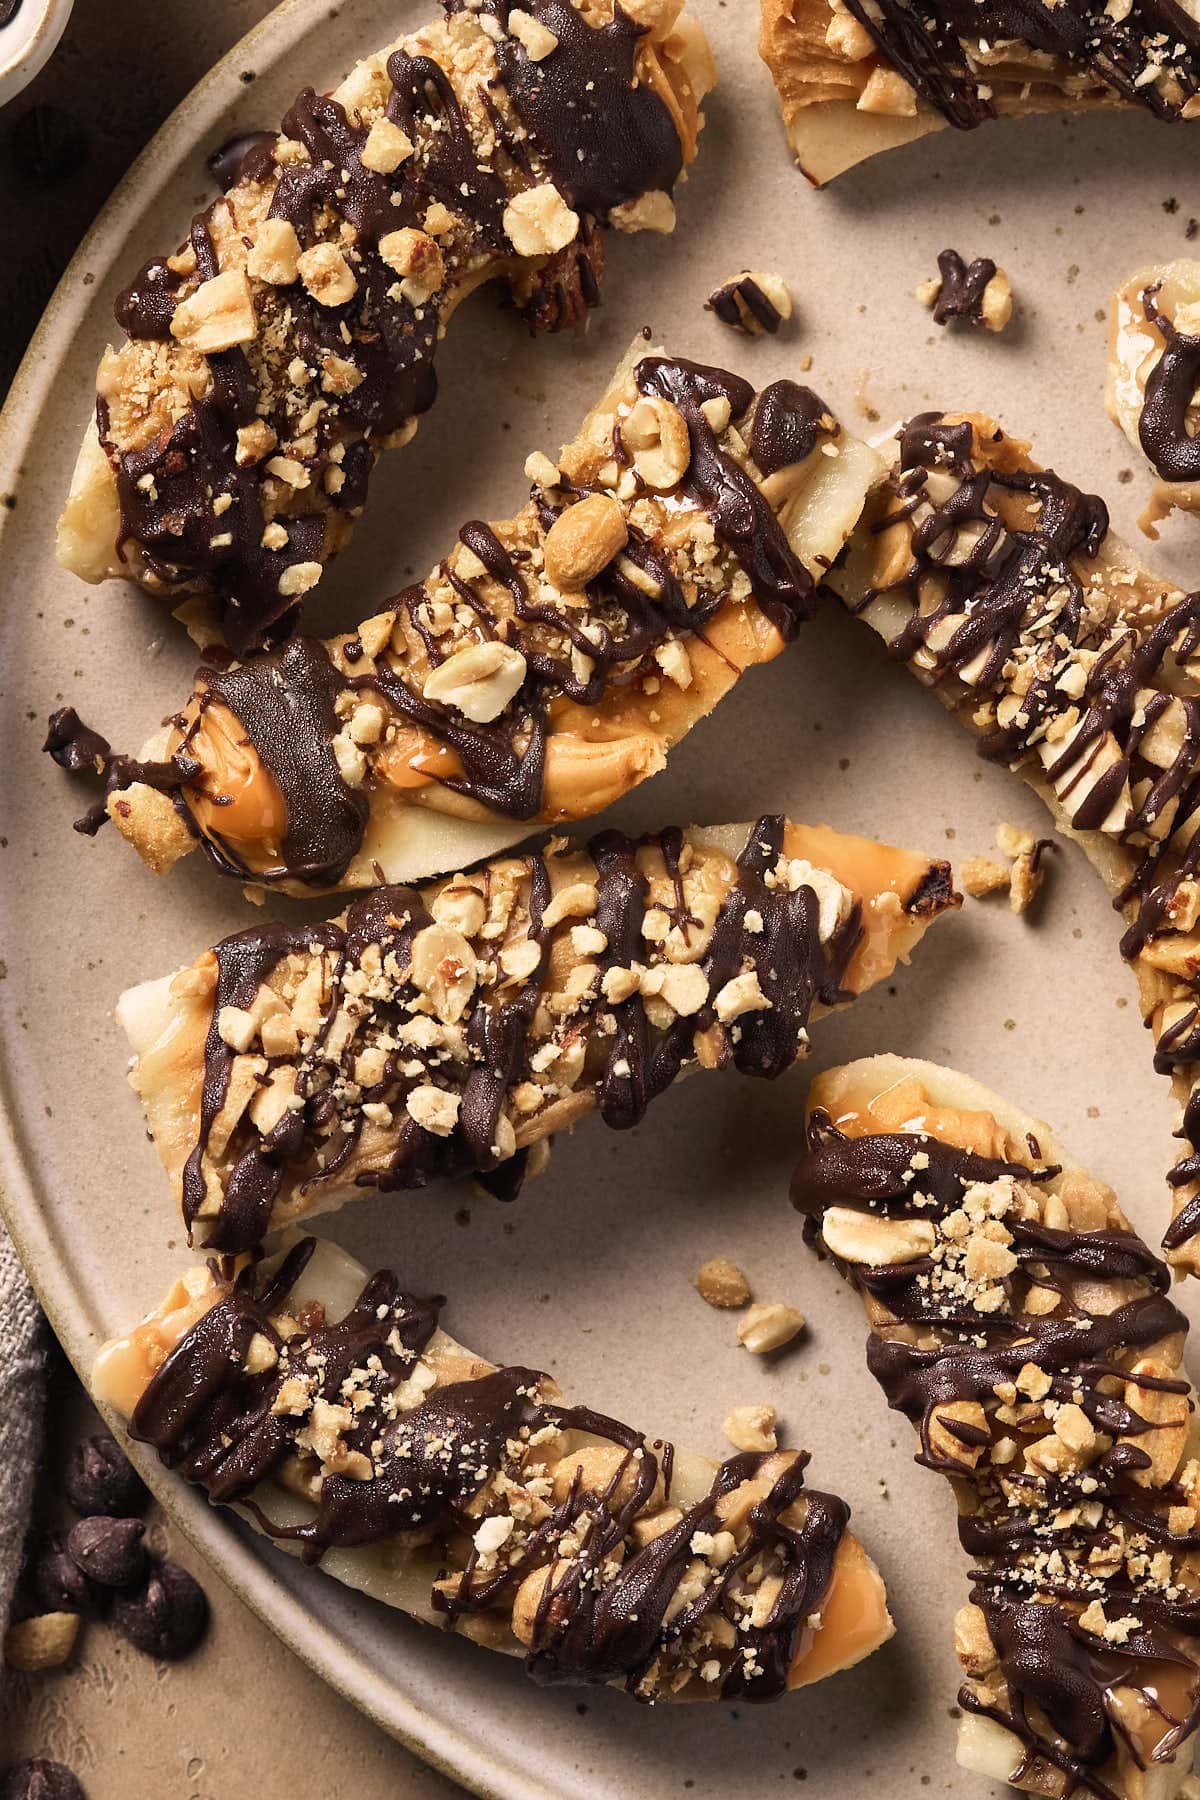 frozen bananas smothered in peanut butter and chocolate.